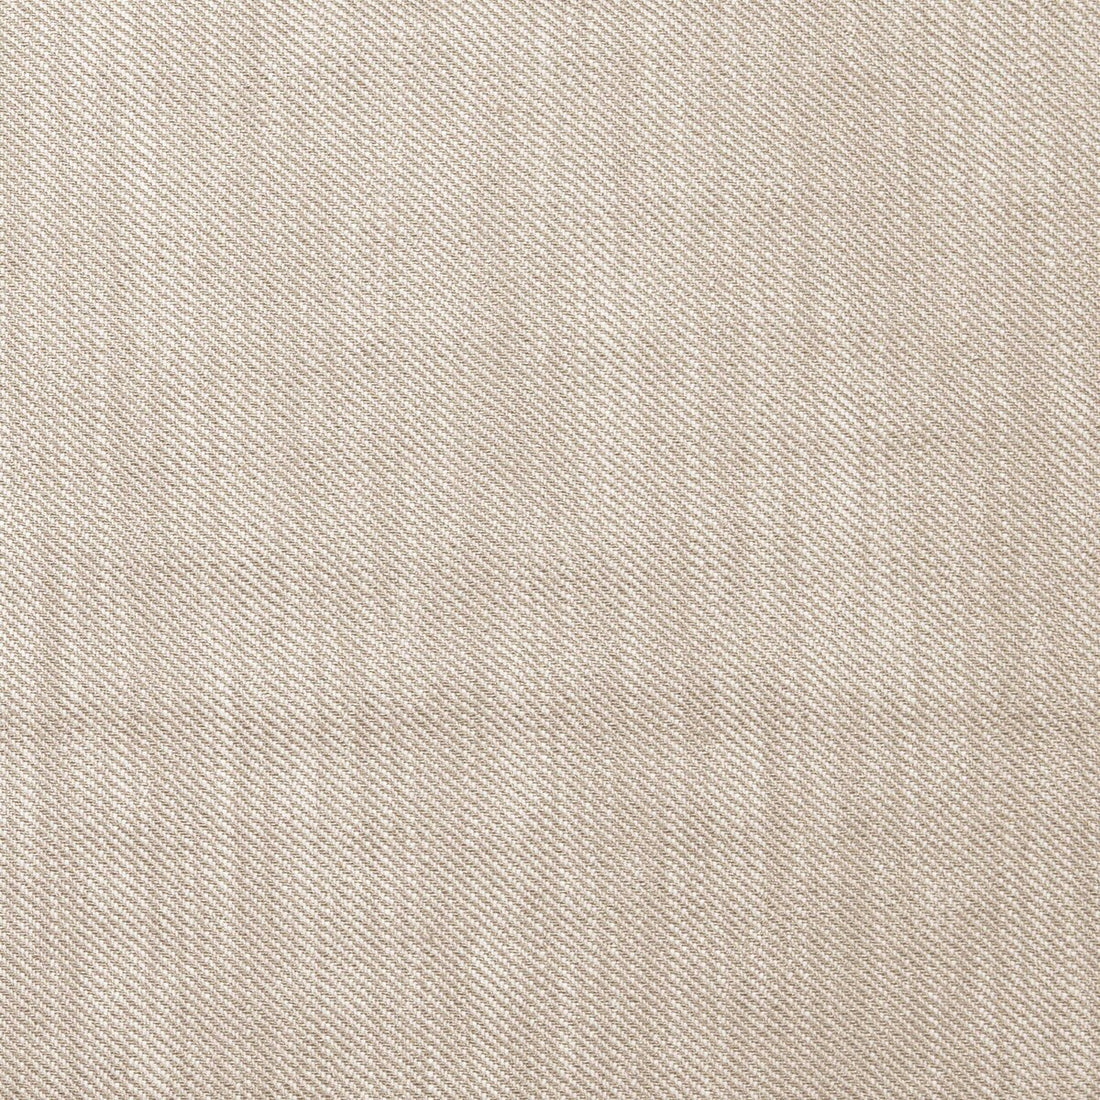 Victoria fabric in arena/blanco color - pattern GDT5388.4.0 - by Gaston y Daniela in the Gaston Africalia collection